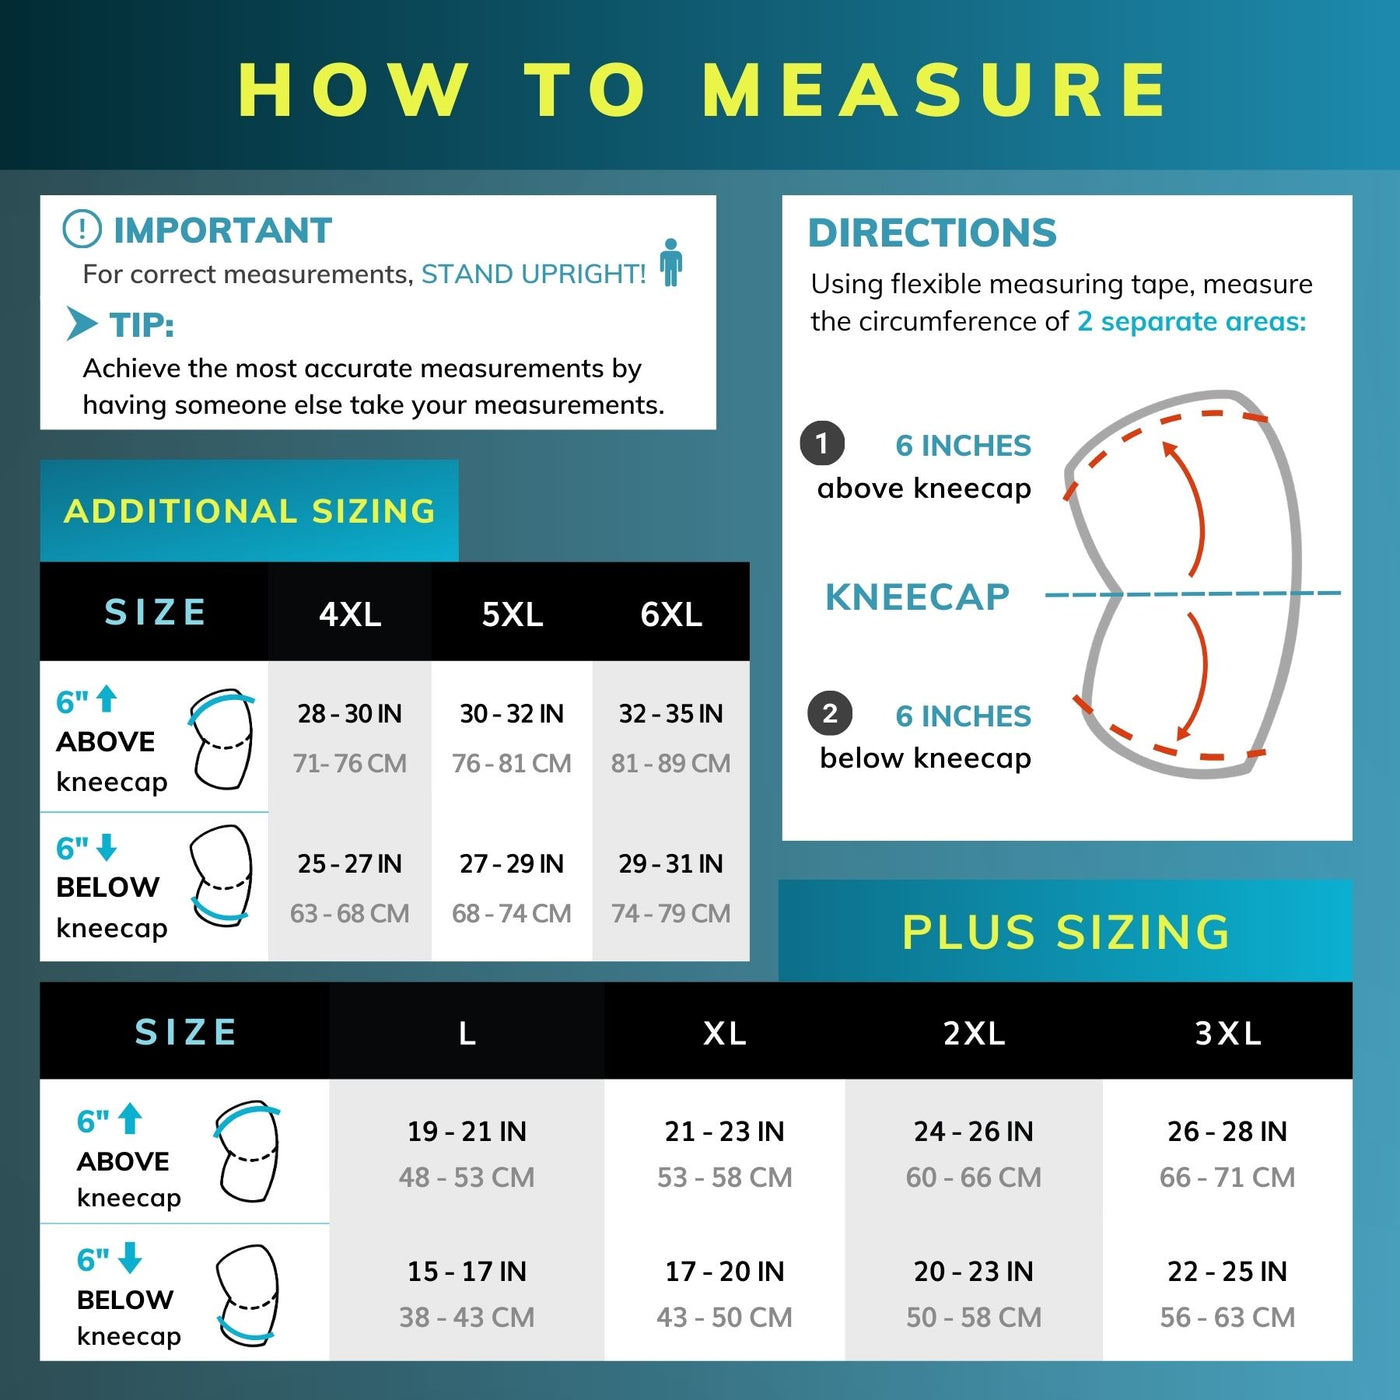 Sizing chart for knee brace for large thighs. Available in sizes L-6XL.